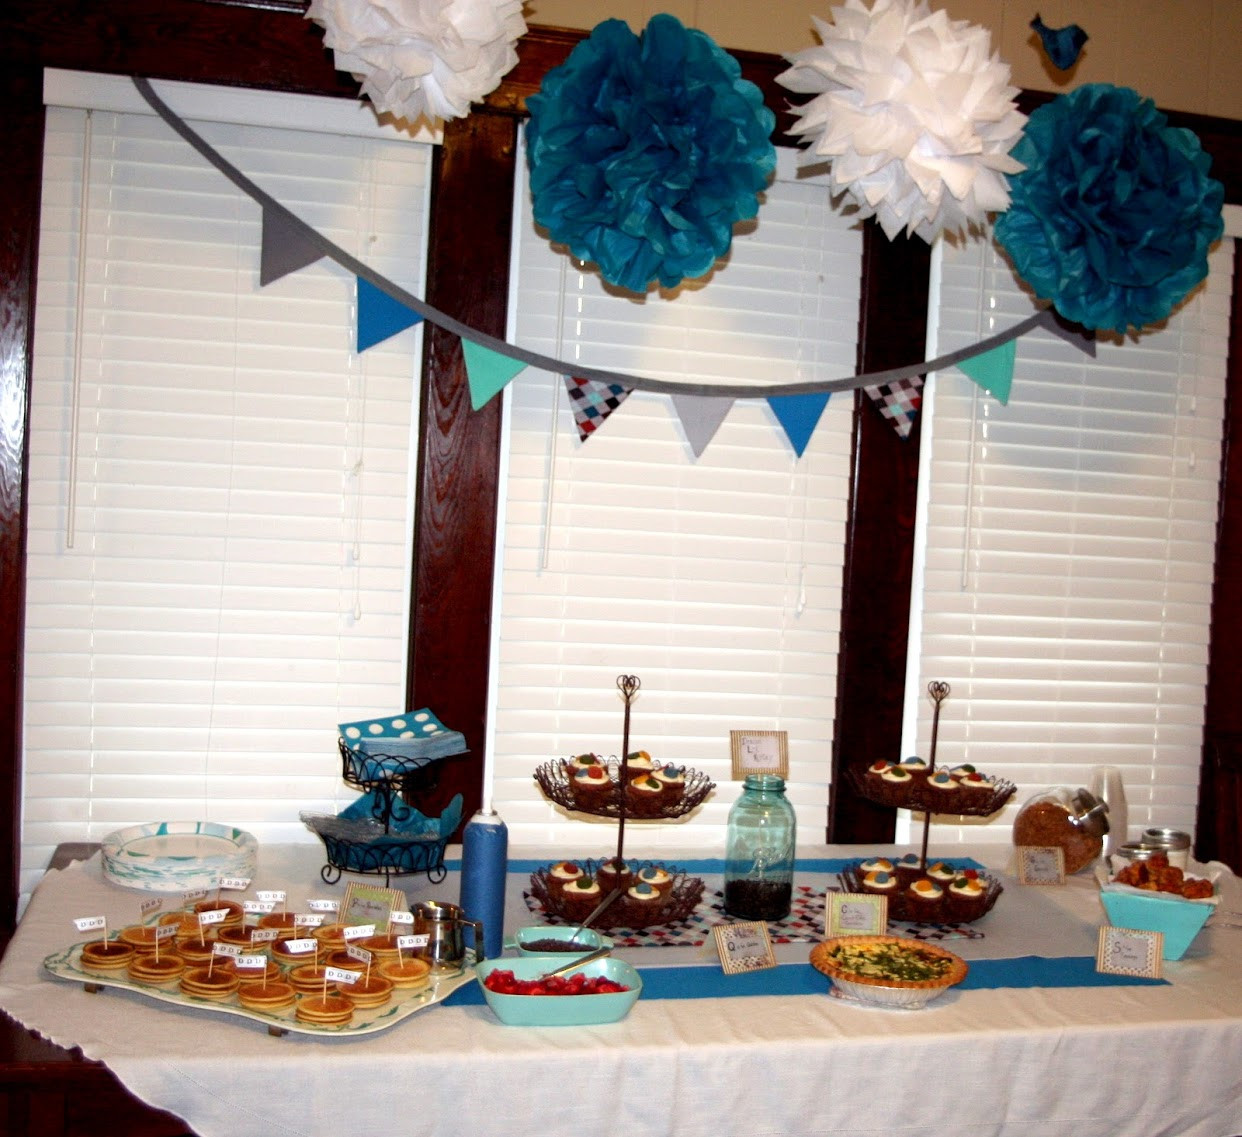 Decoration Ideas For Baby Shower
 Baby Shower Decorations For Boys Ideas